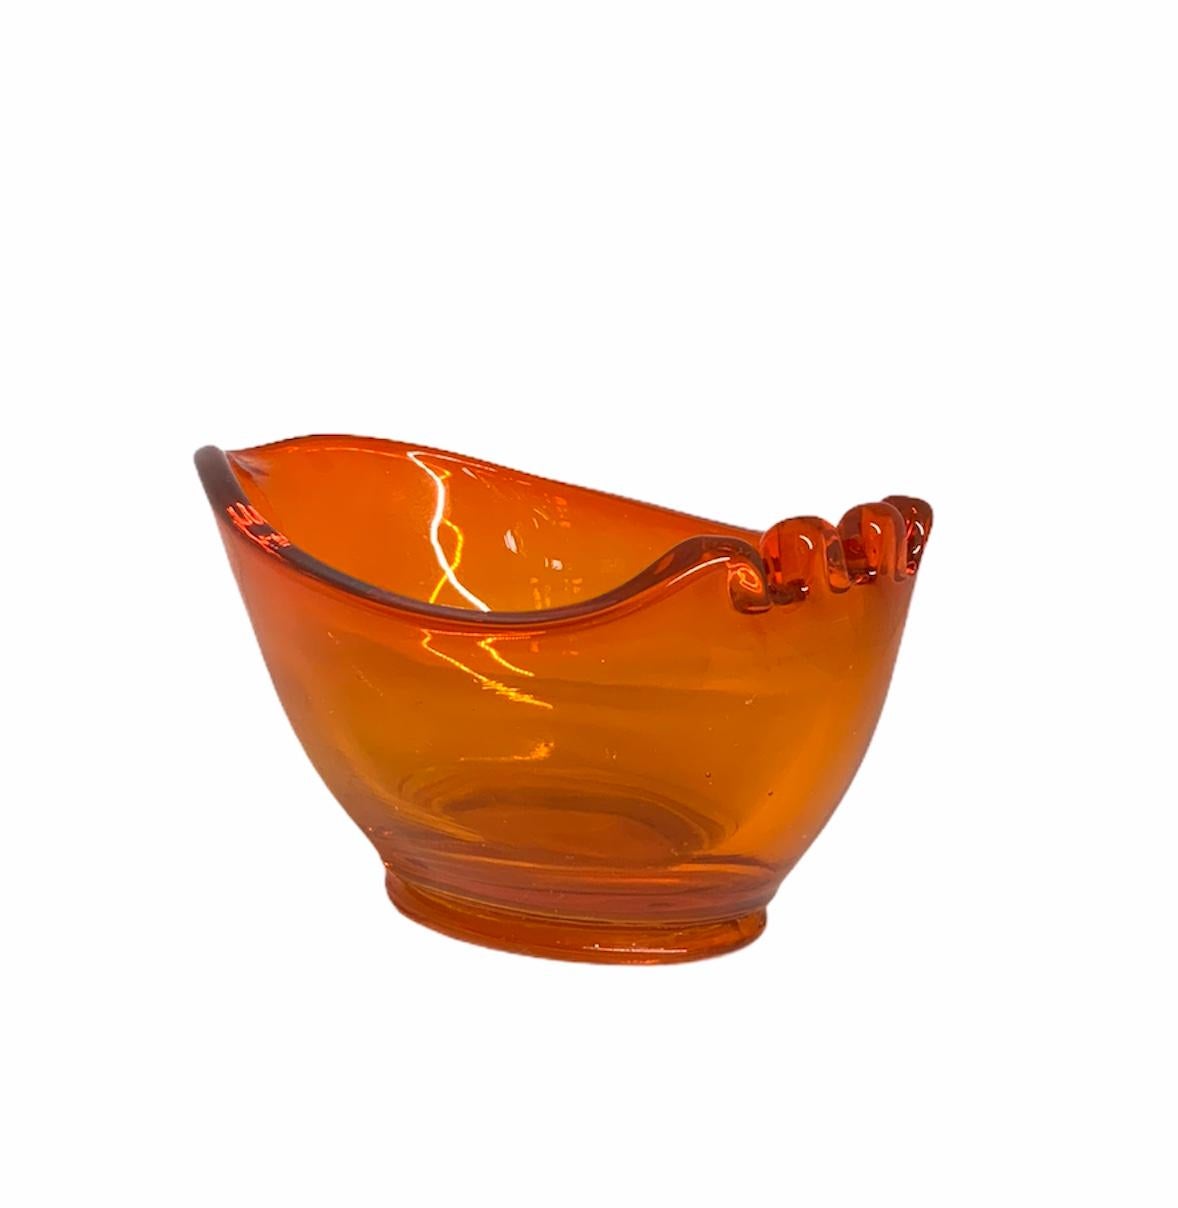 This is a tangerine color scoop shaped bowl ashtray for three cigarettes.